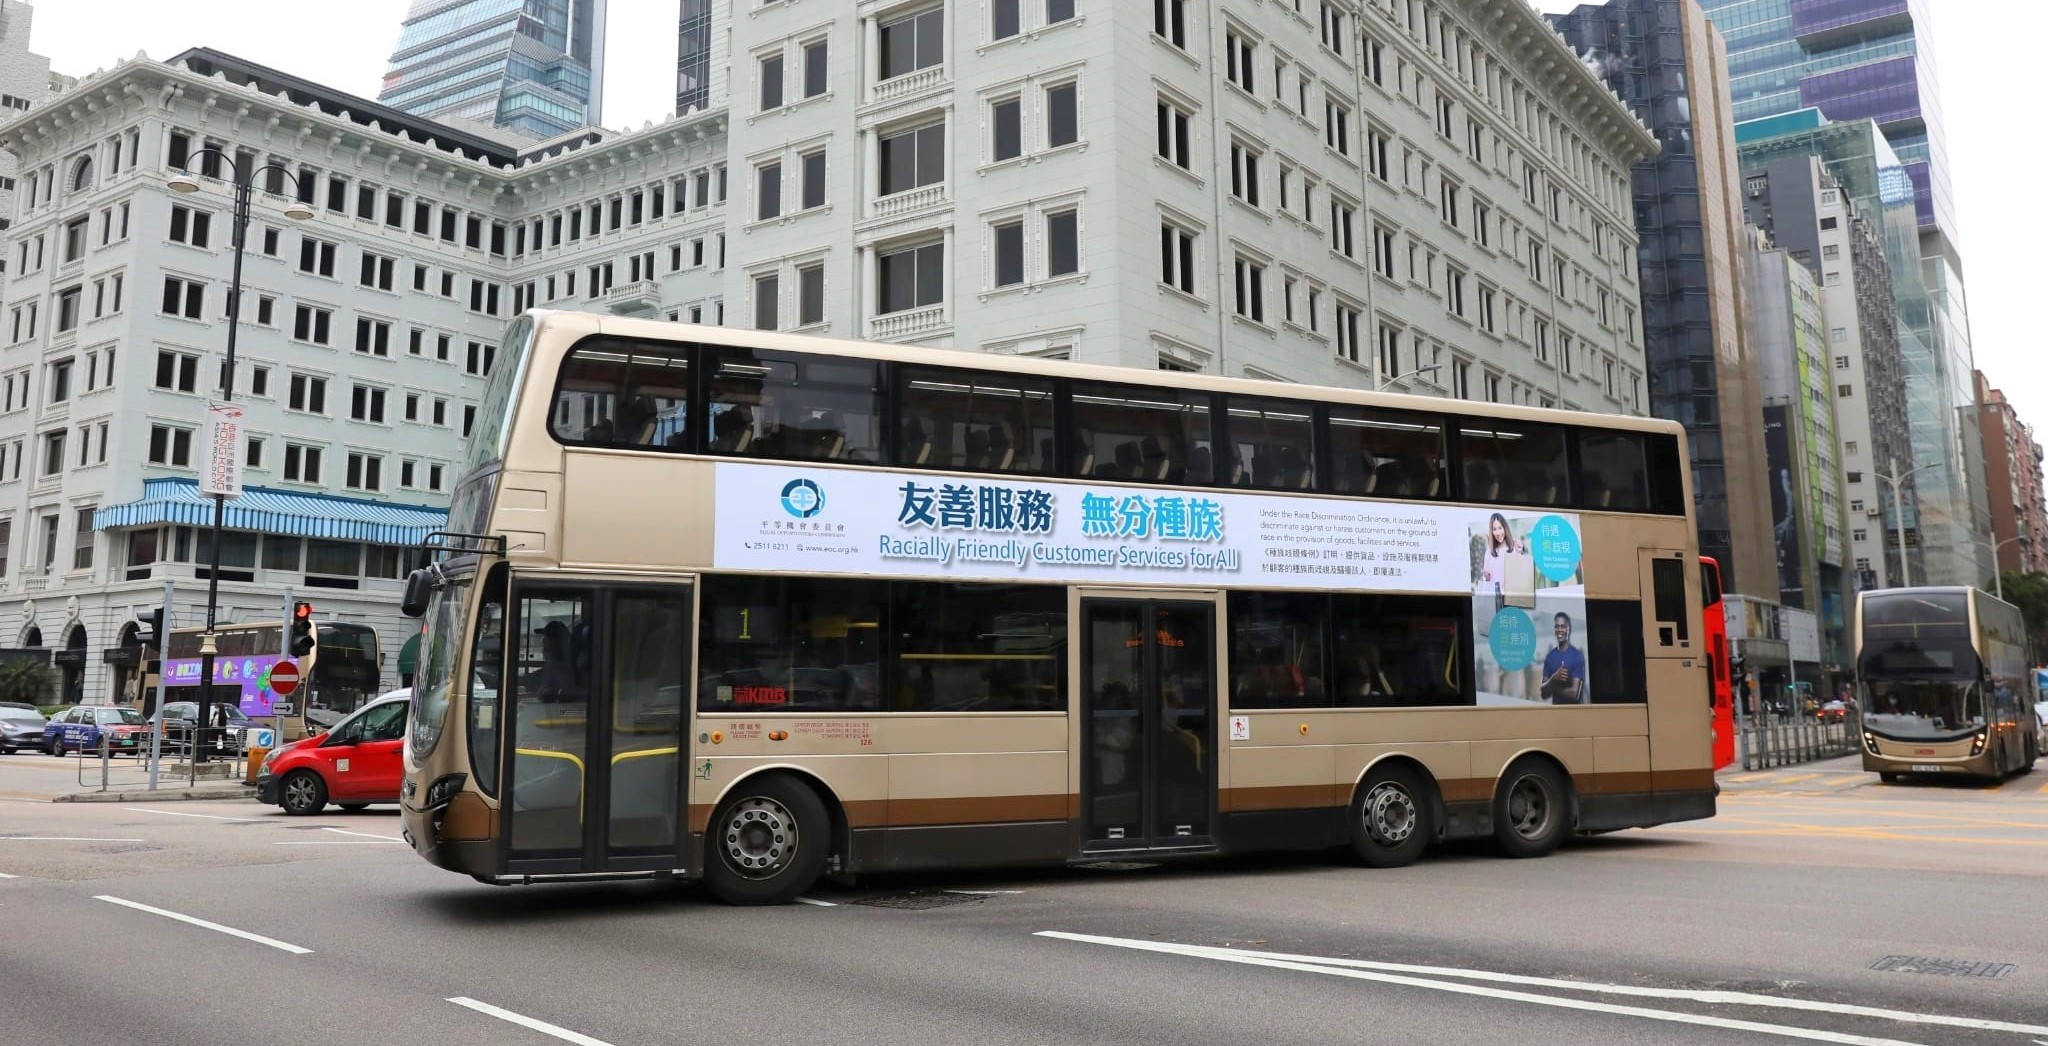 The Equal Opportunities Commission launched a bus body advertising campaign to promote racially friendly services.